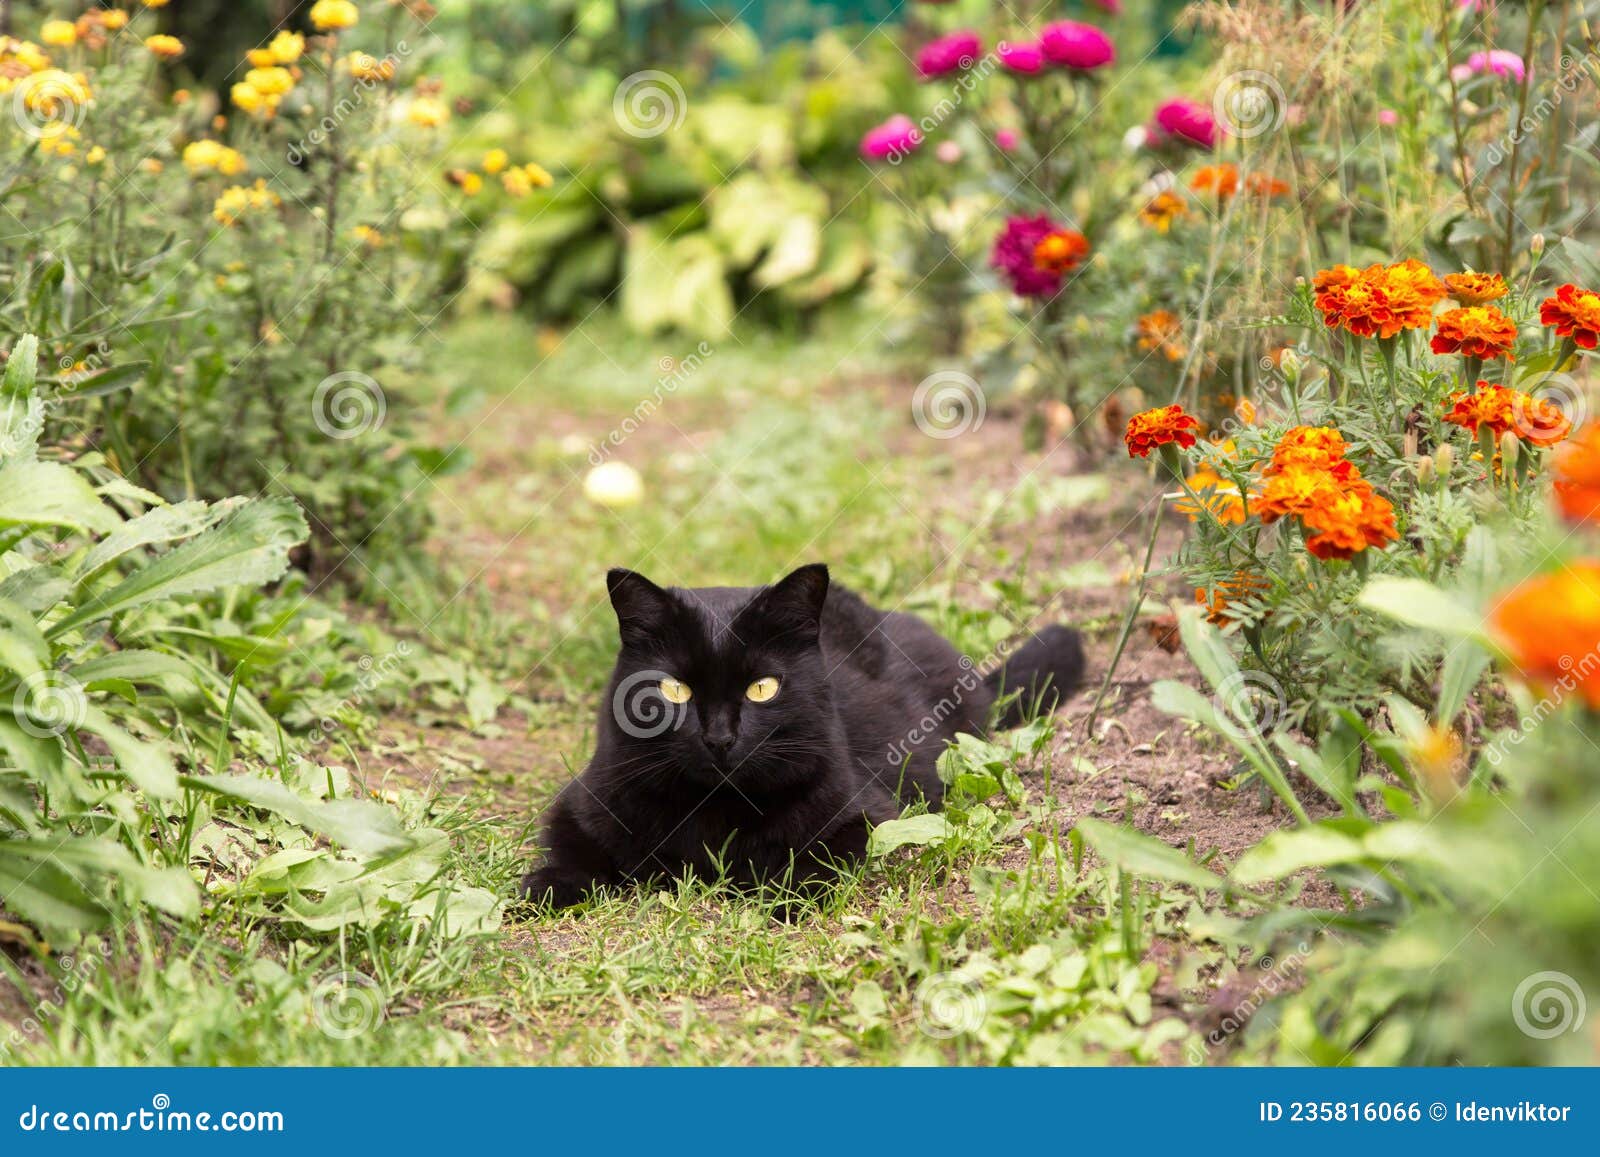 black bombay cat with yellow eyes lie outdoors in nature in garden with flowers